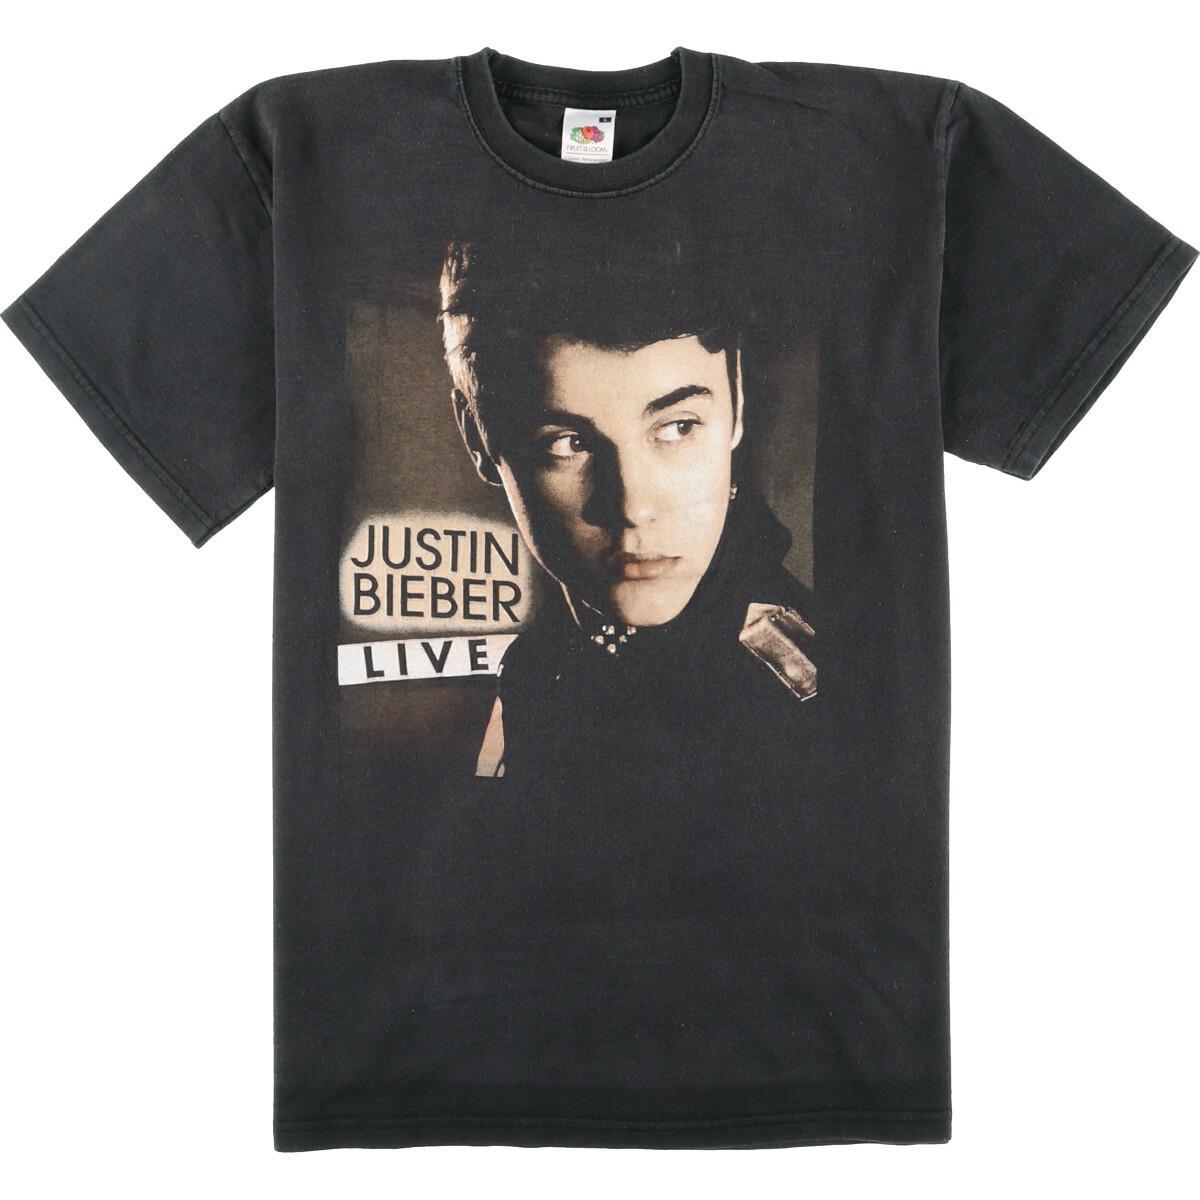 FRUIT OF THE LOOM JUSTIN BIEBER ジャスティンビーバー BELIEVE TOUR 2013 バンドTシャツ メンズS /eaa056289 【中古】 【200705】【SS2009】【JS2010】【SS2012】【SS2103】【SS2106】